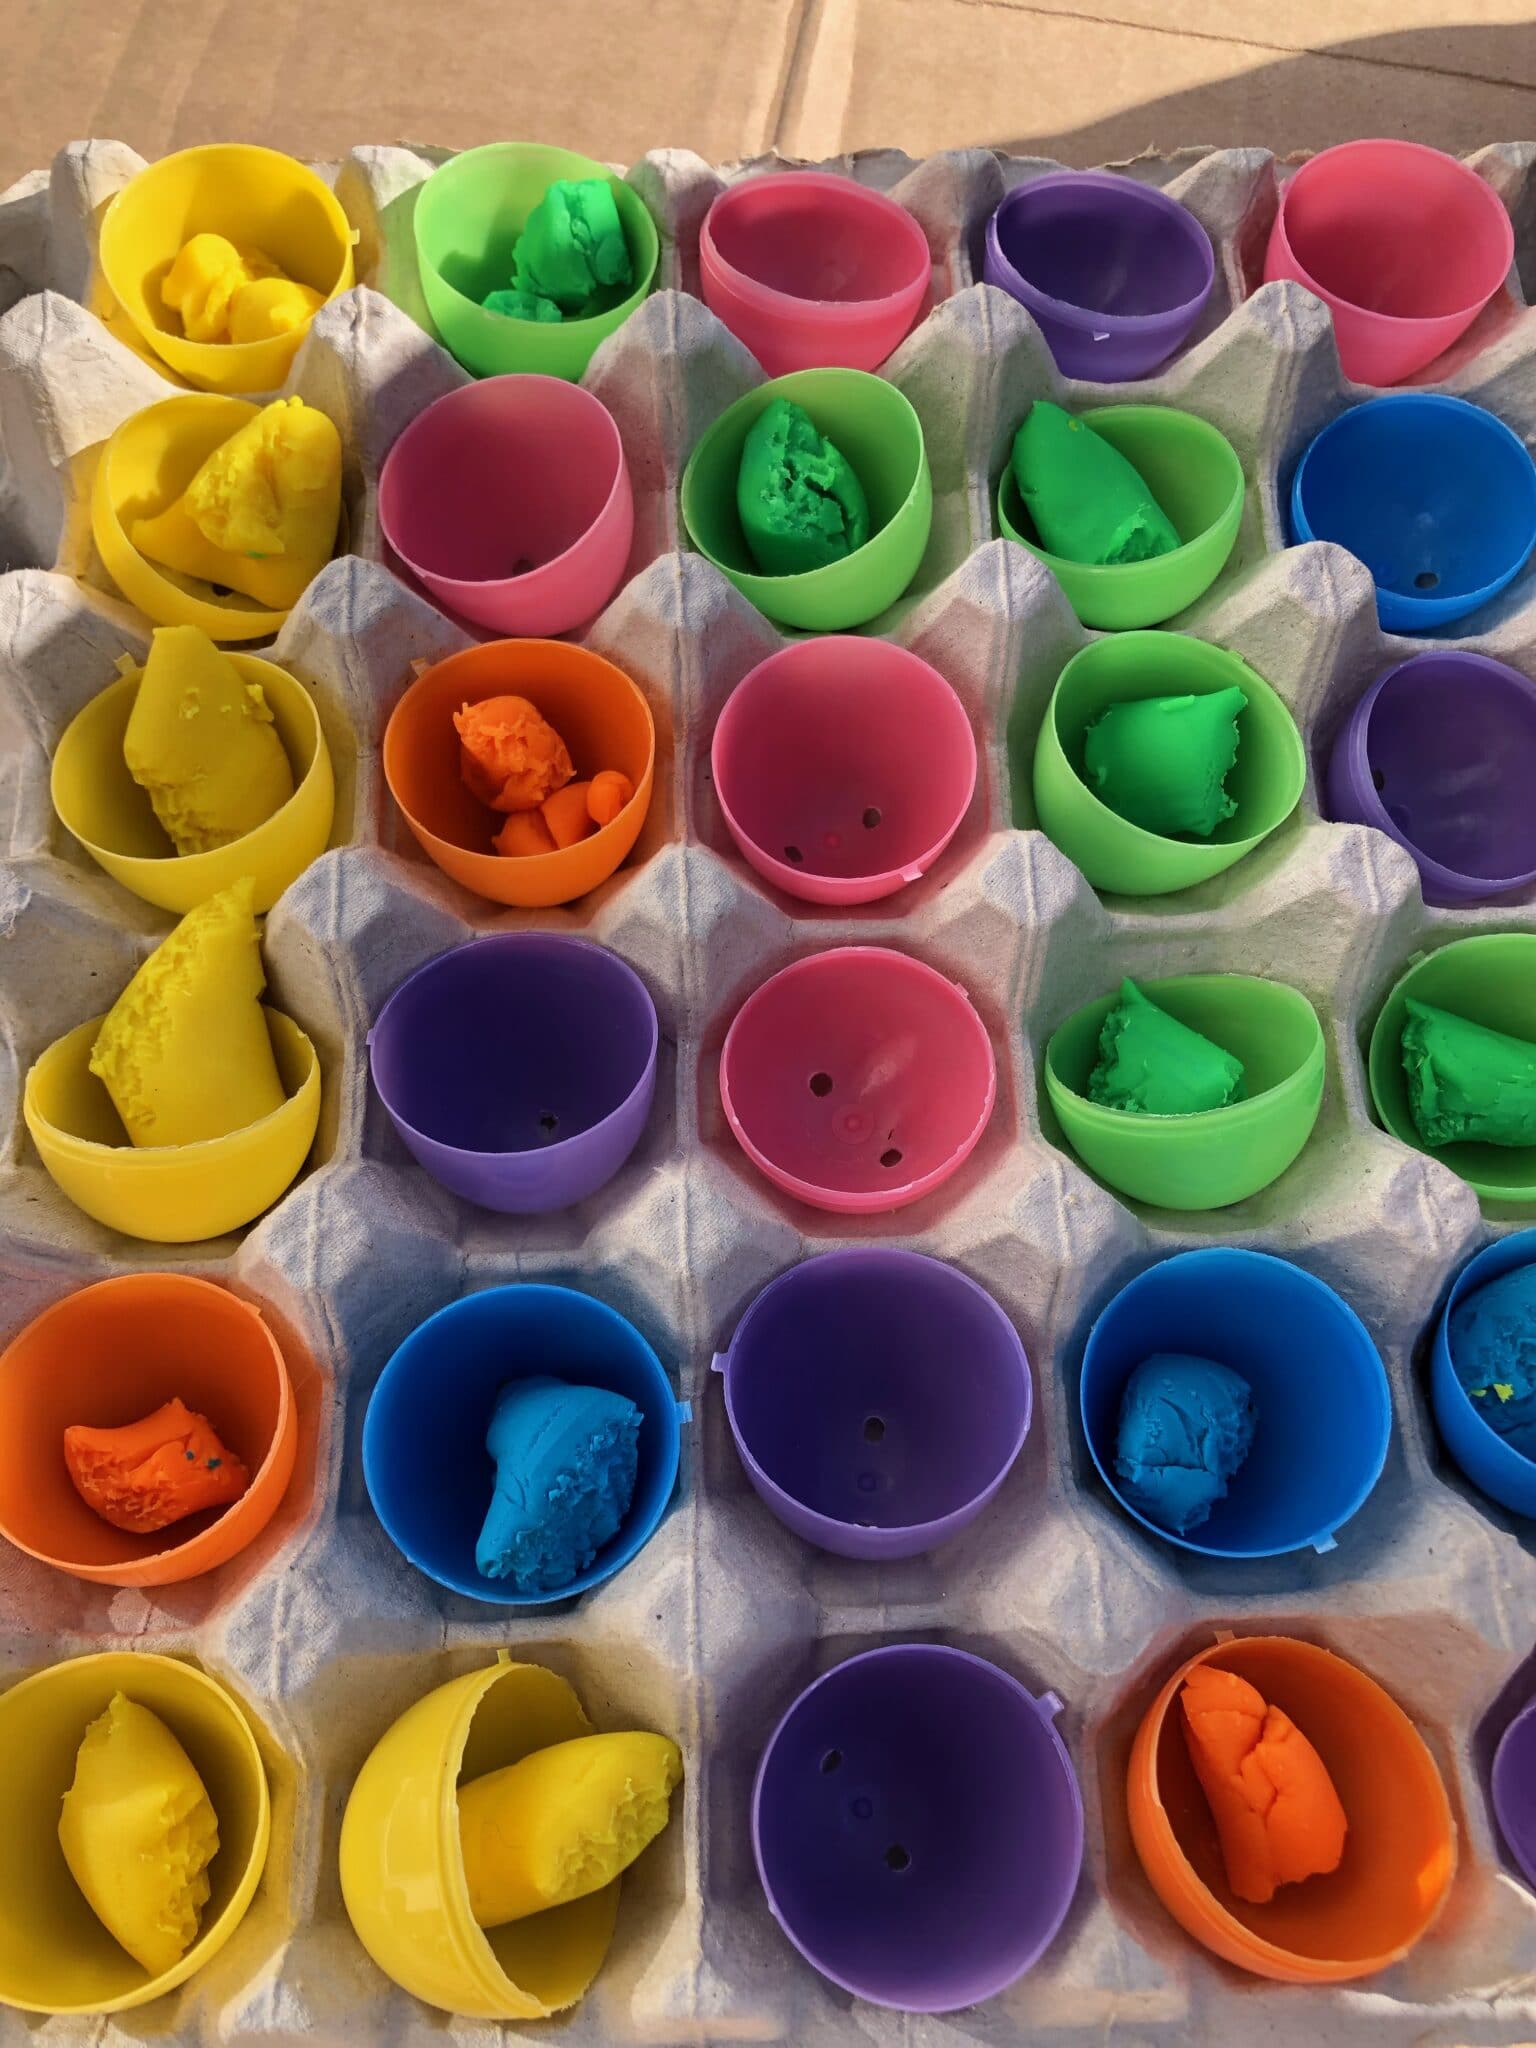 Colorful plastic eggs are for more than scavenger hunts. Learn colors, practice fine motor skills, create patterns, and even learn letters and numbers with these simple activities.